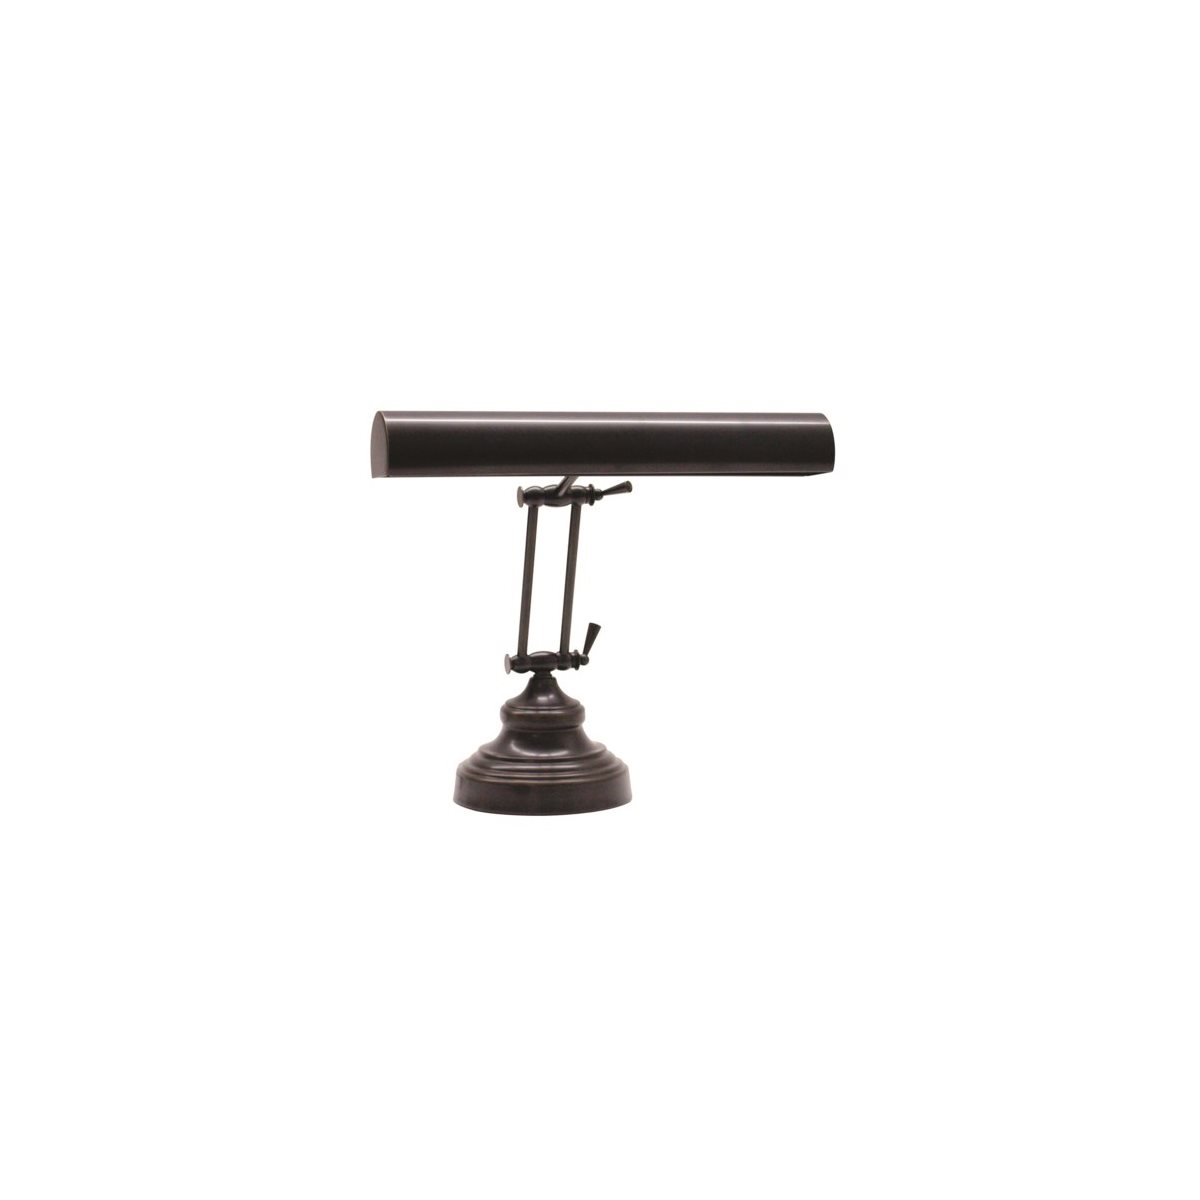 HOUSE OF TROY - AP14-41-91 - Advent 14" Oil Rubbed Bronze Piano / Desk Lamp